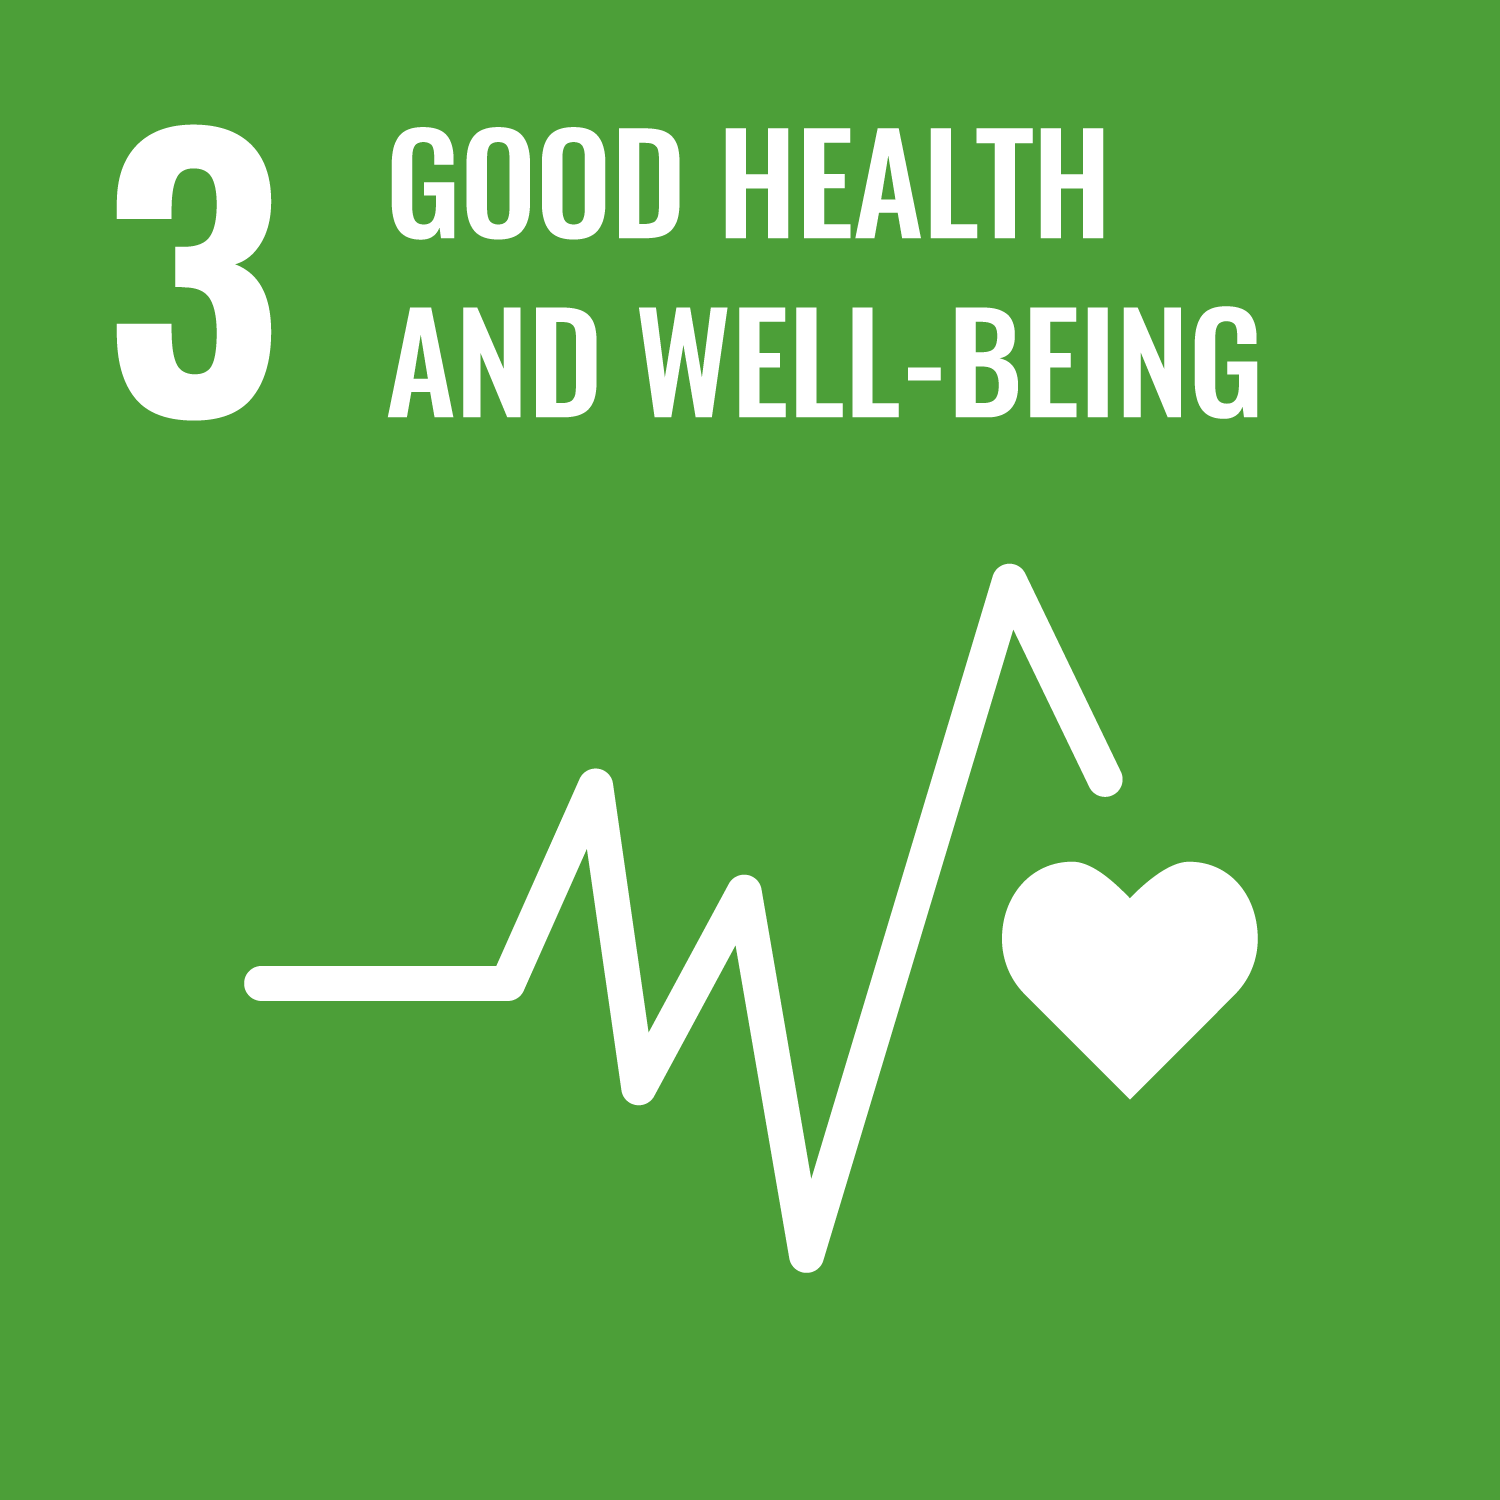 Sustainable Development Goal: SDG 3 "Good Health and Well-Being"